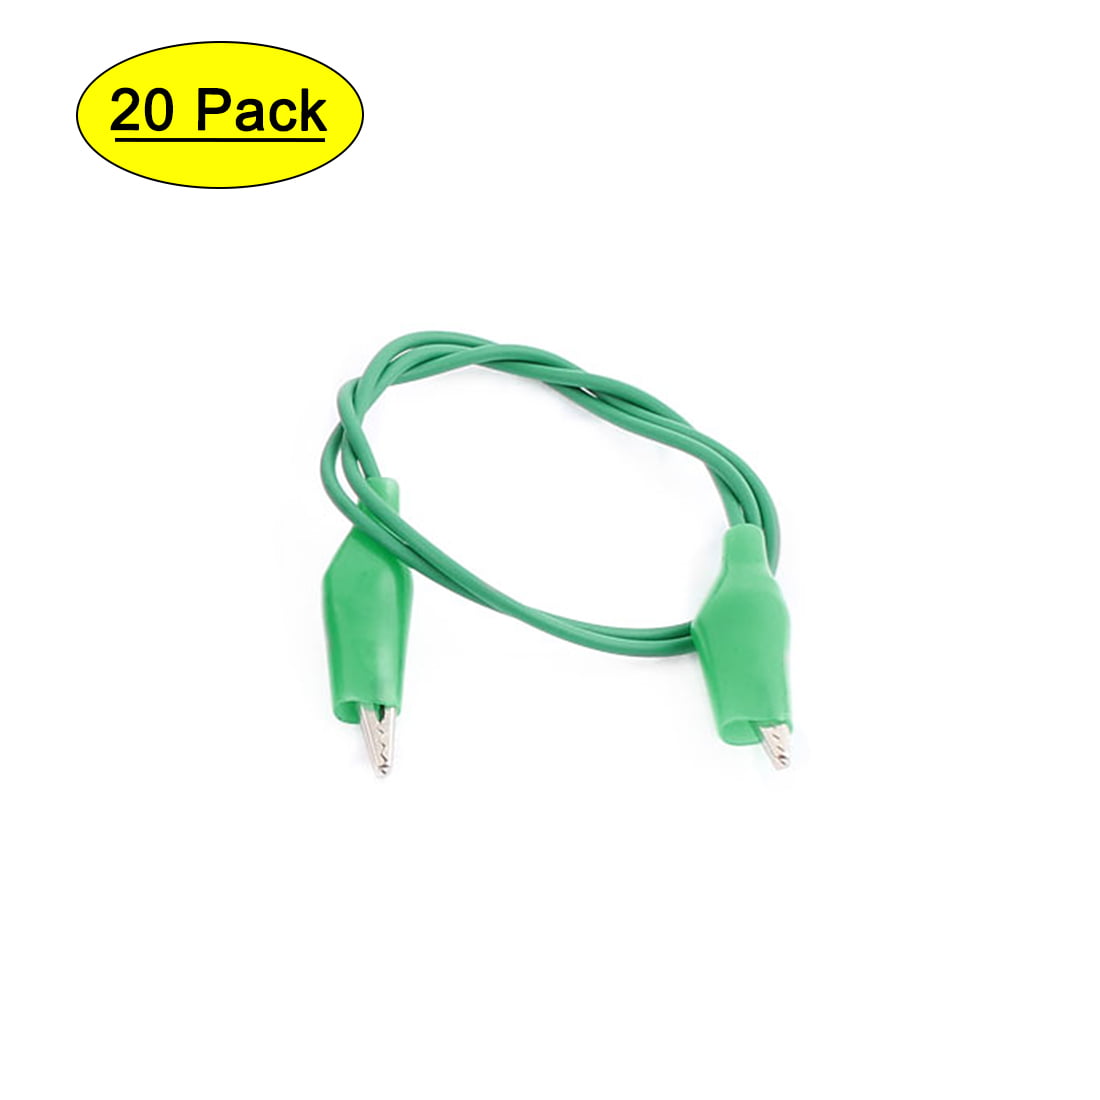 5pcs 50cm Double-ended Crocodile Clips Cable Alligator Clips testing wire DC AC 